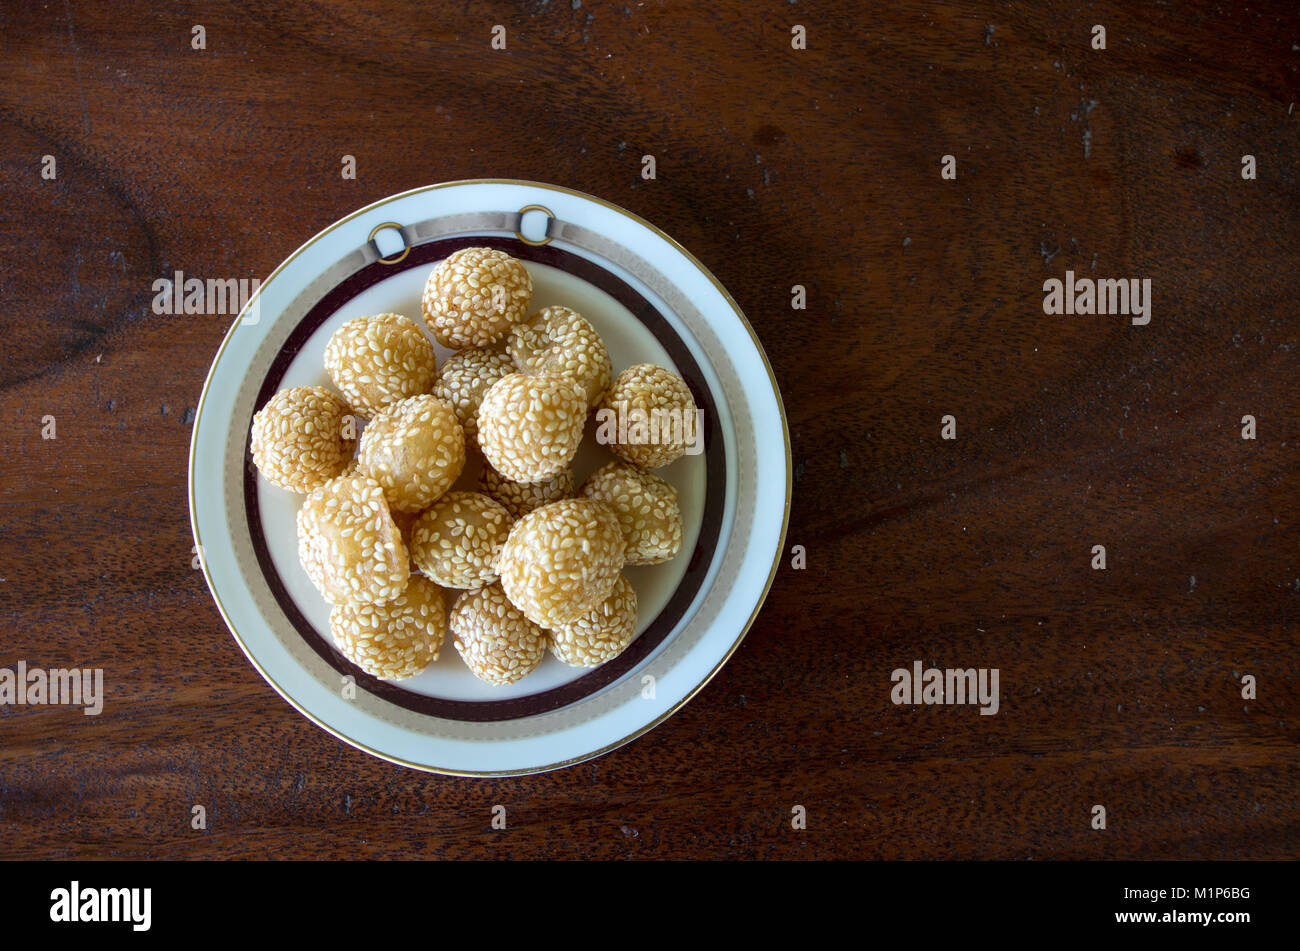 Onde-onde goreng pastry snack in Indonesia on plate with copy space right Stock Photo